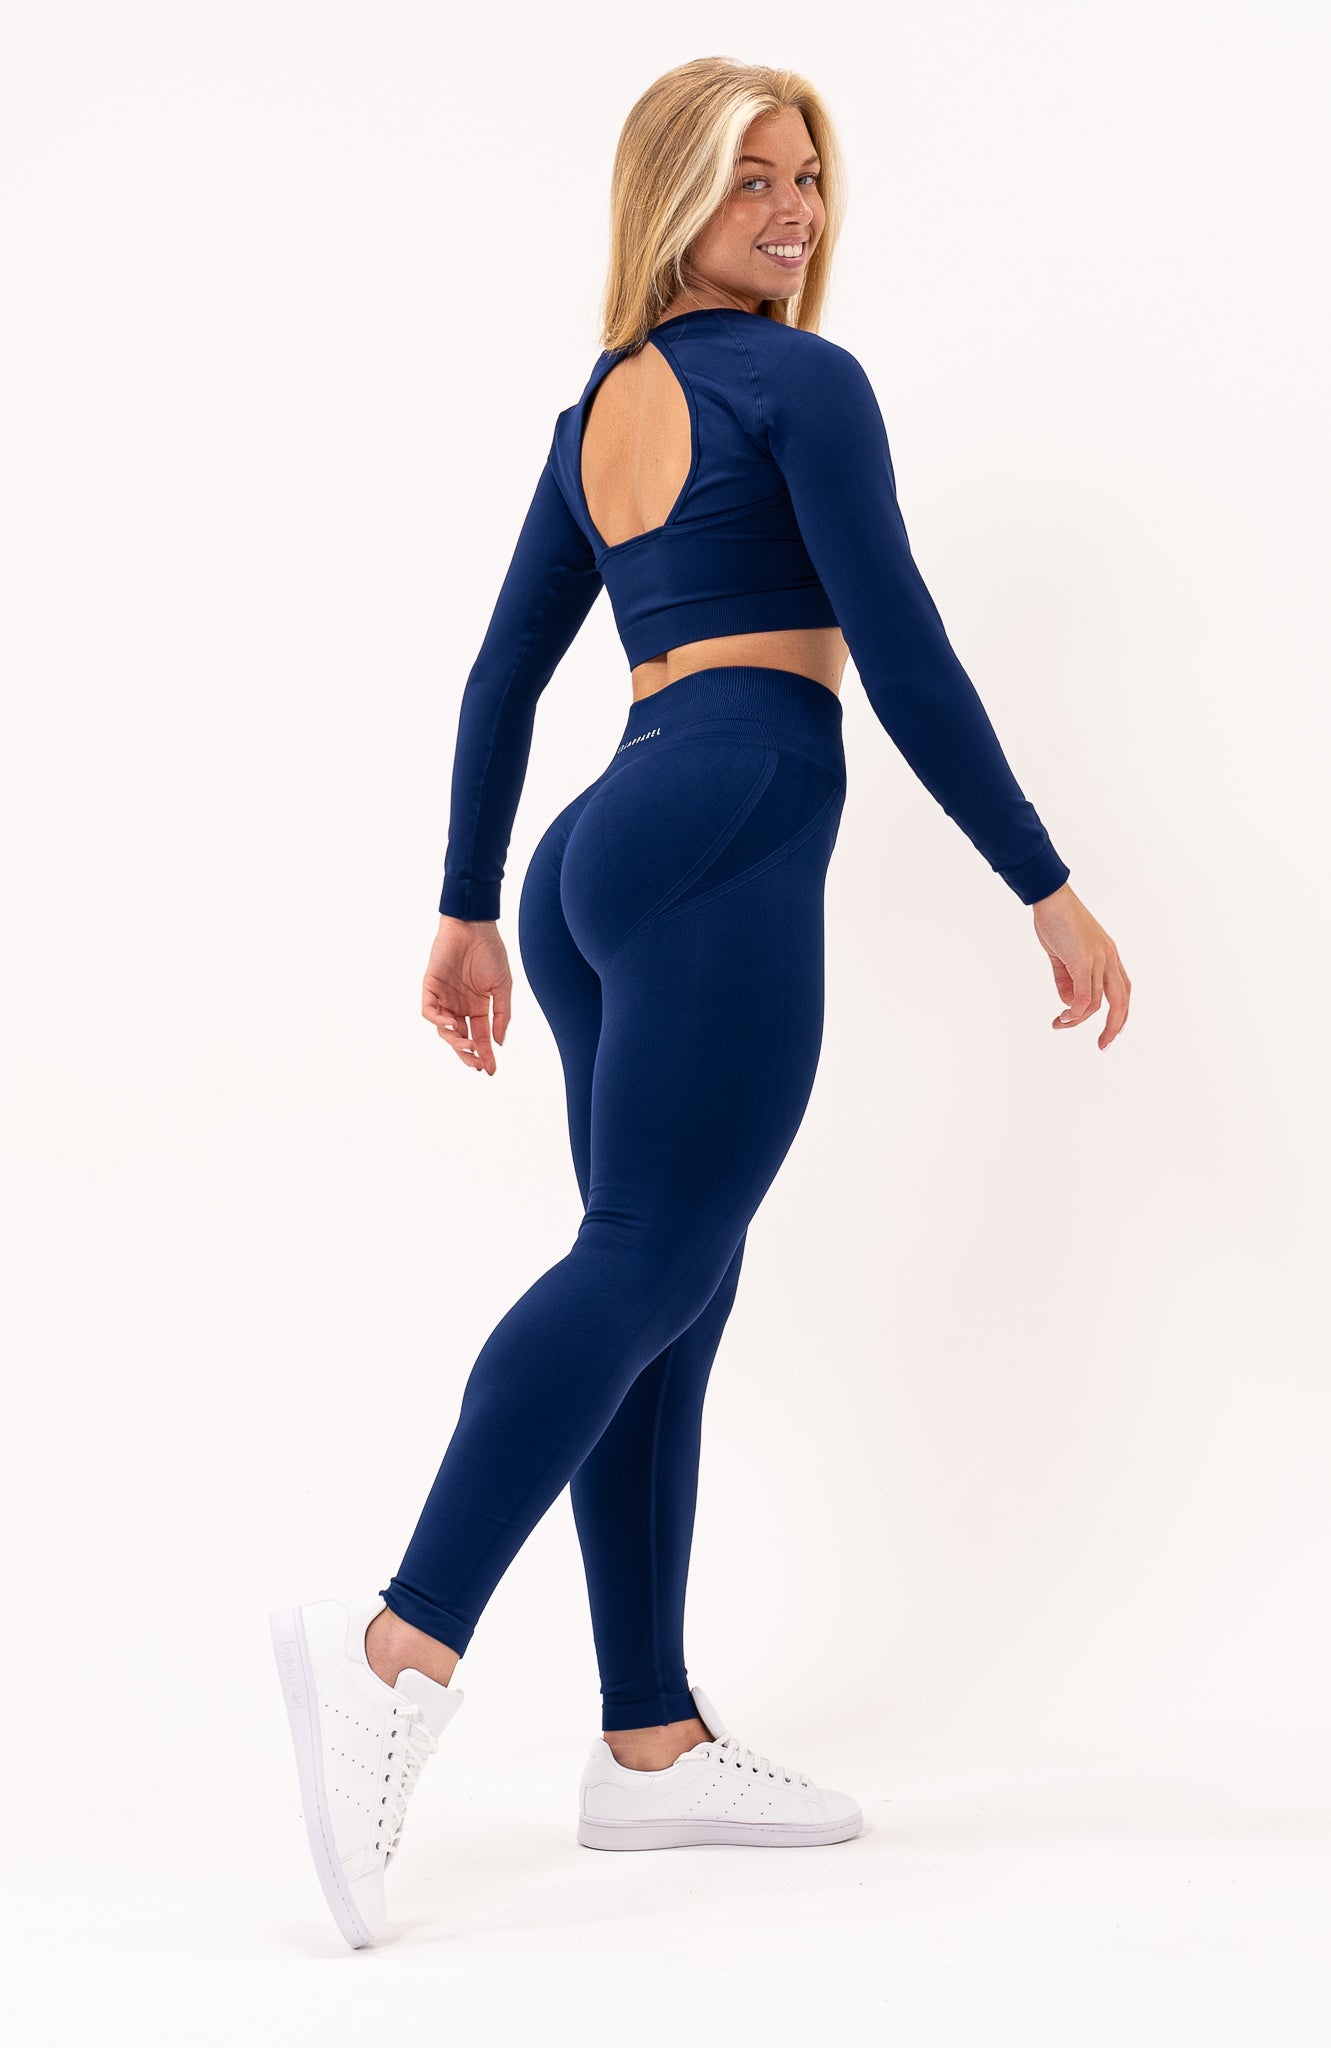 V3 Apparel Women's Tempo seamless long sleeve cropped training top in navy royal blue with thumb hole long sleeves and crop fit for gym workouts training, Running, yoga, bodybuilding and bikini fitness.